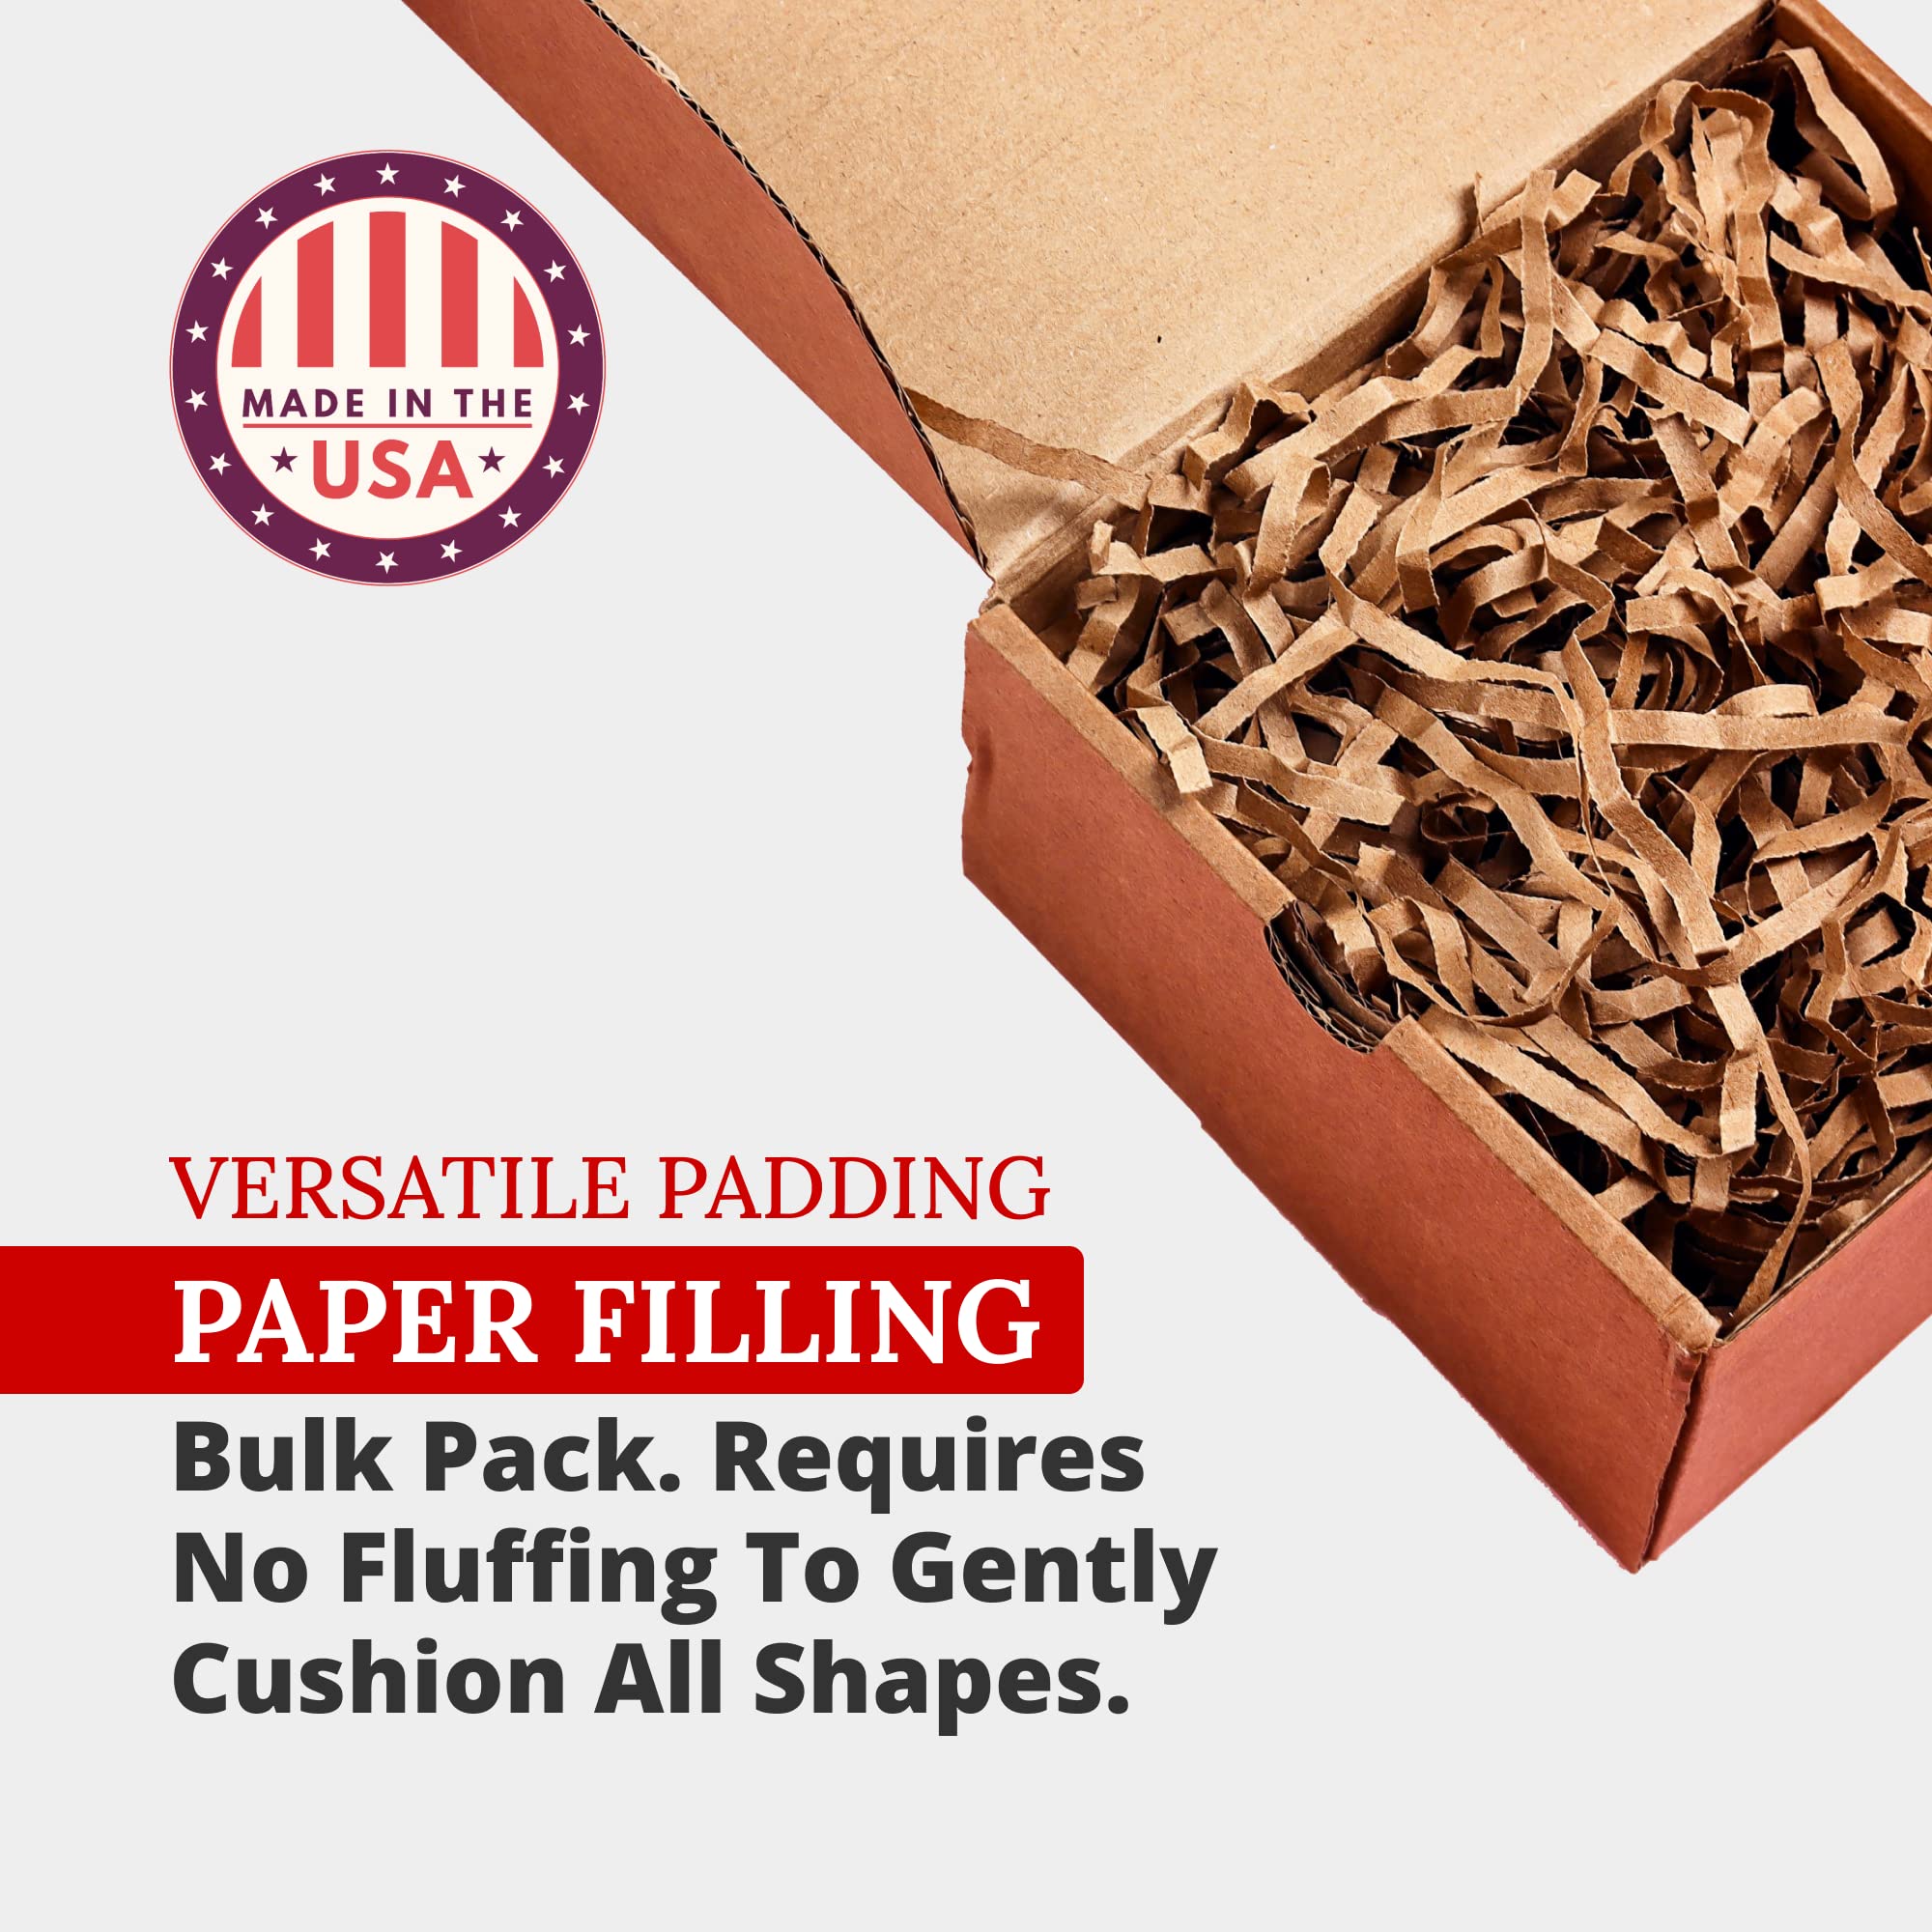 Partners 10 lb. Kraft Crinkle Paper Packing, Shipping, and Moving Box Filler Shredded Paper for Box Package, Basket Stuffing, Bag, Gift Wrapping, Holidays, Crafts, and Decoration